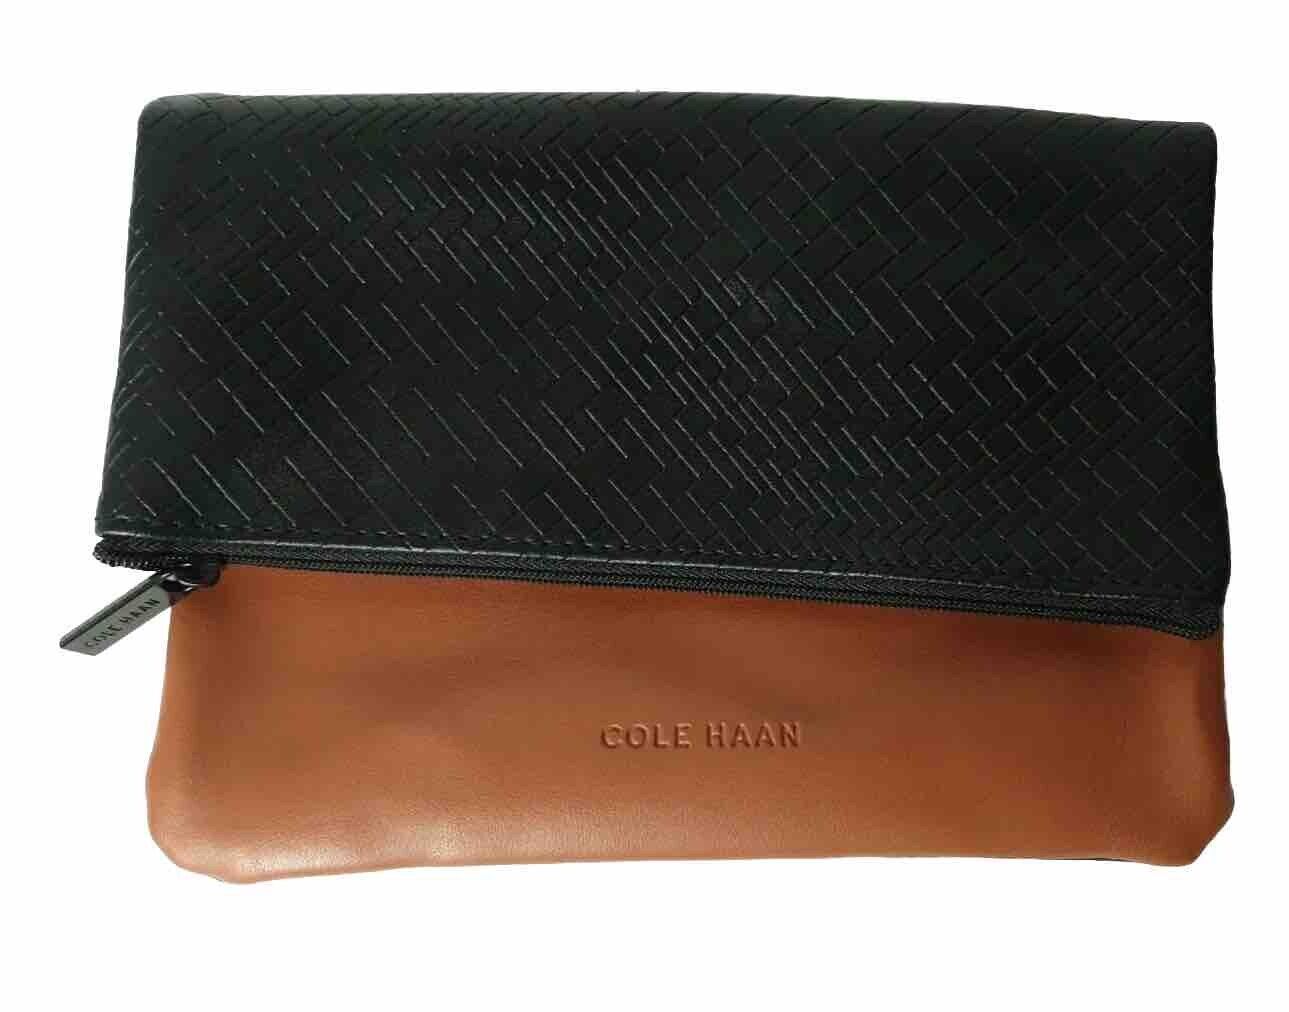 Cole Haan American Airlines Brown Black amenity travel kit bag  foldable